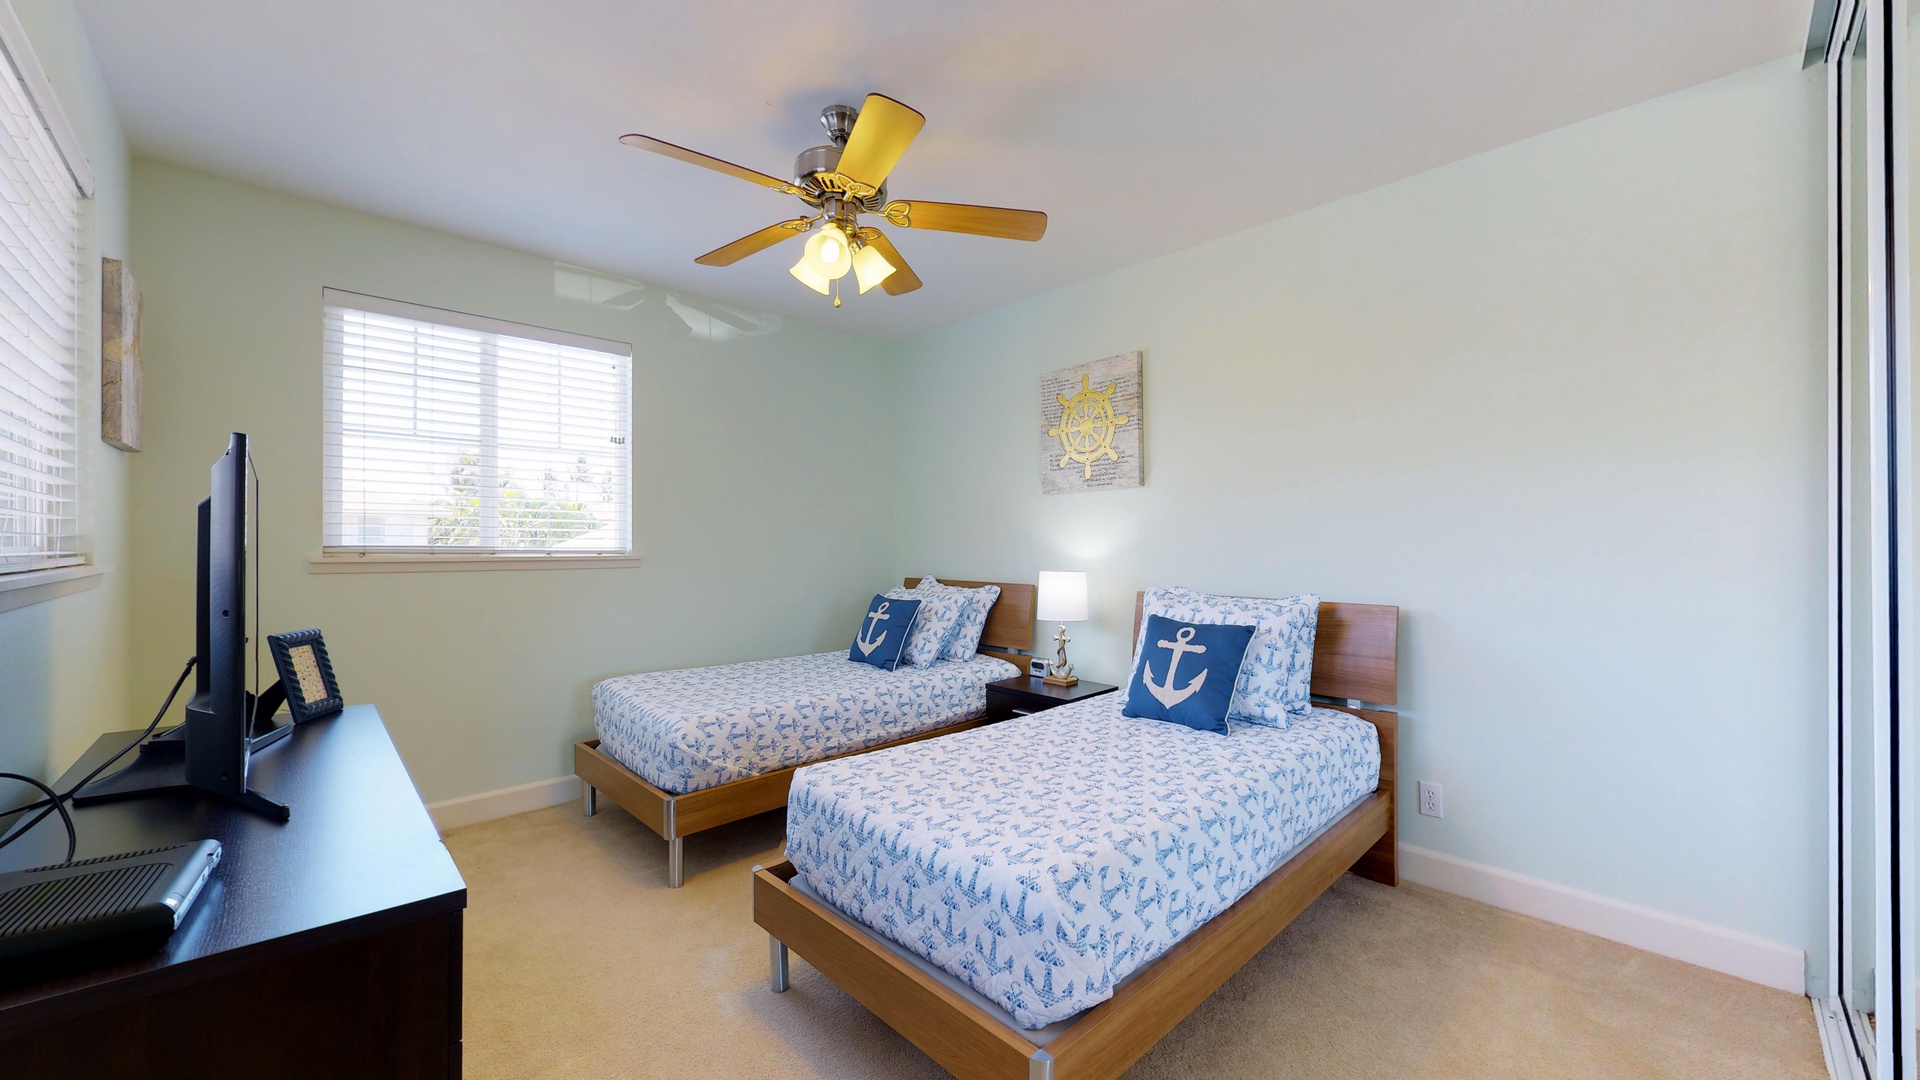 Kapolei Vacation Rentals, Ko Olina Kai 1035D - Third guest bedroom, located upstairs with a ceiling fan and twin beds.